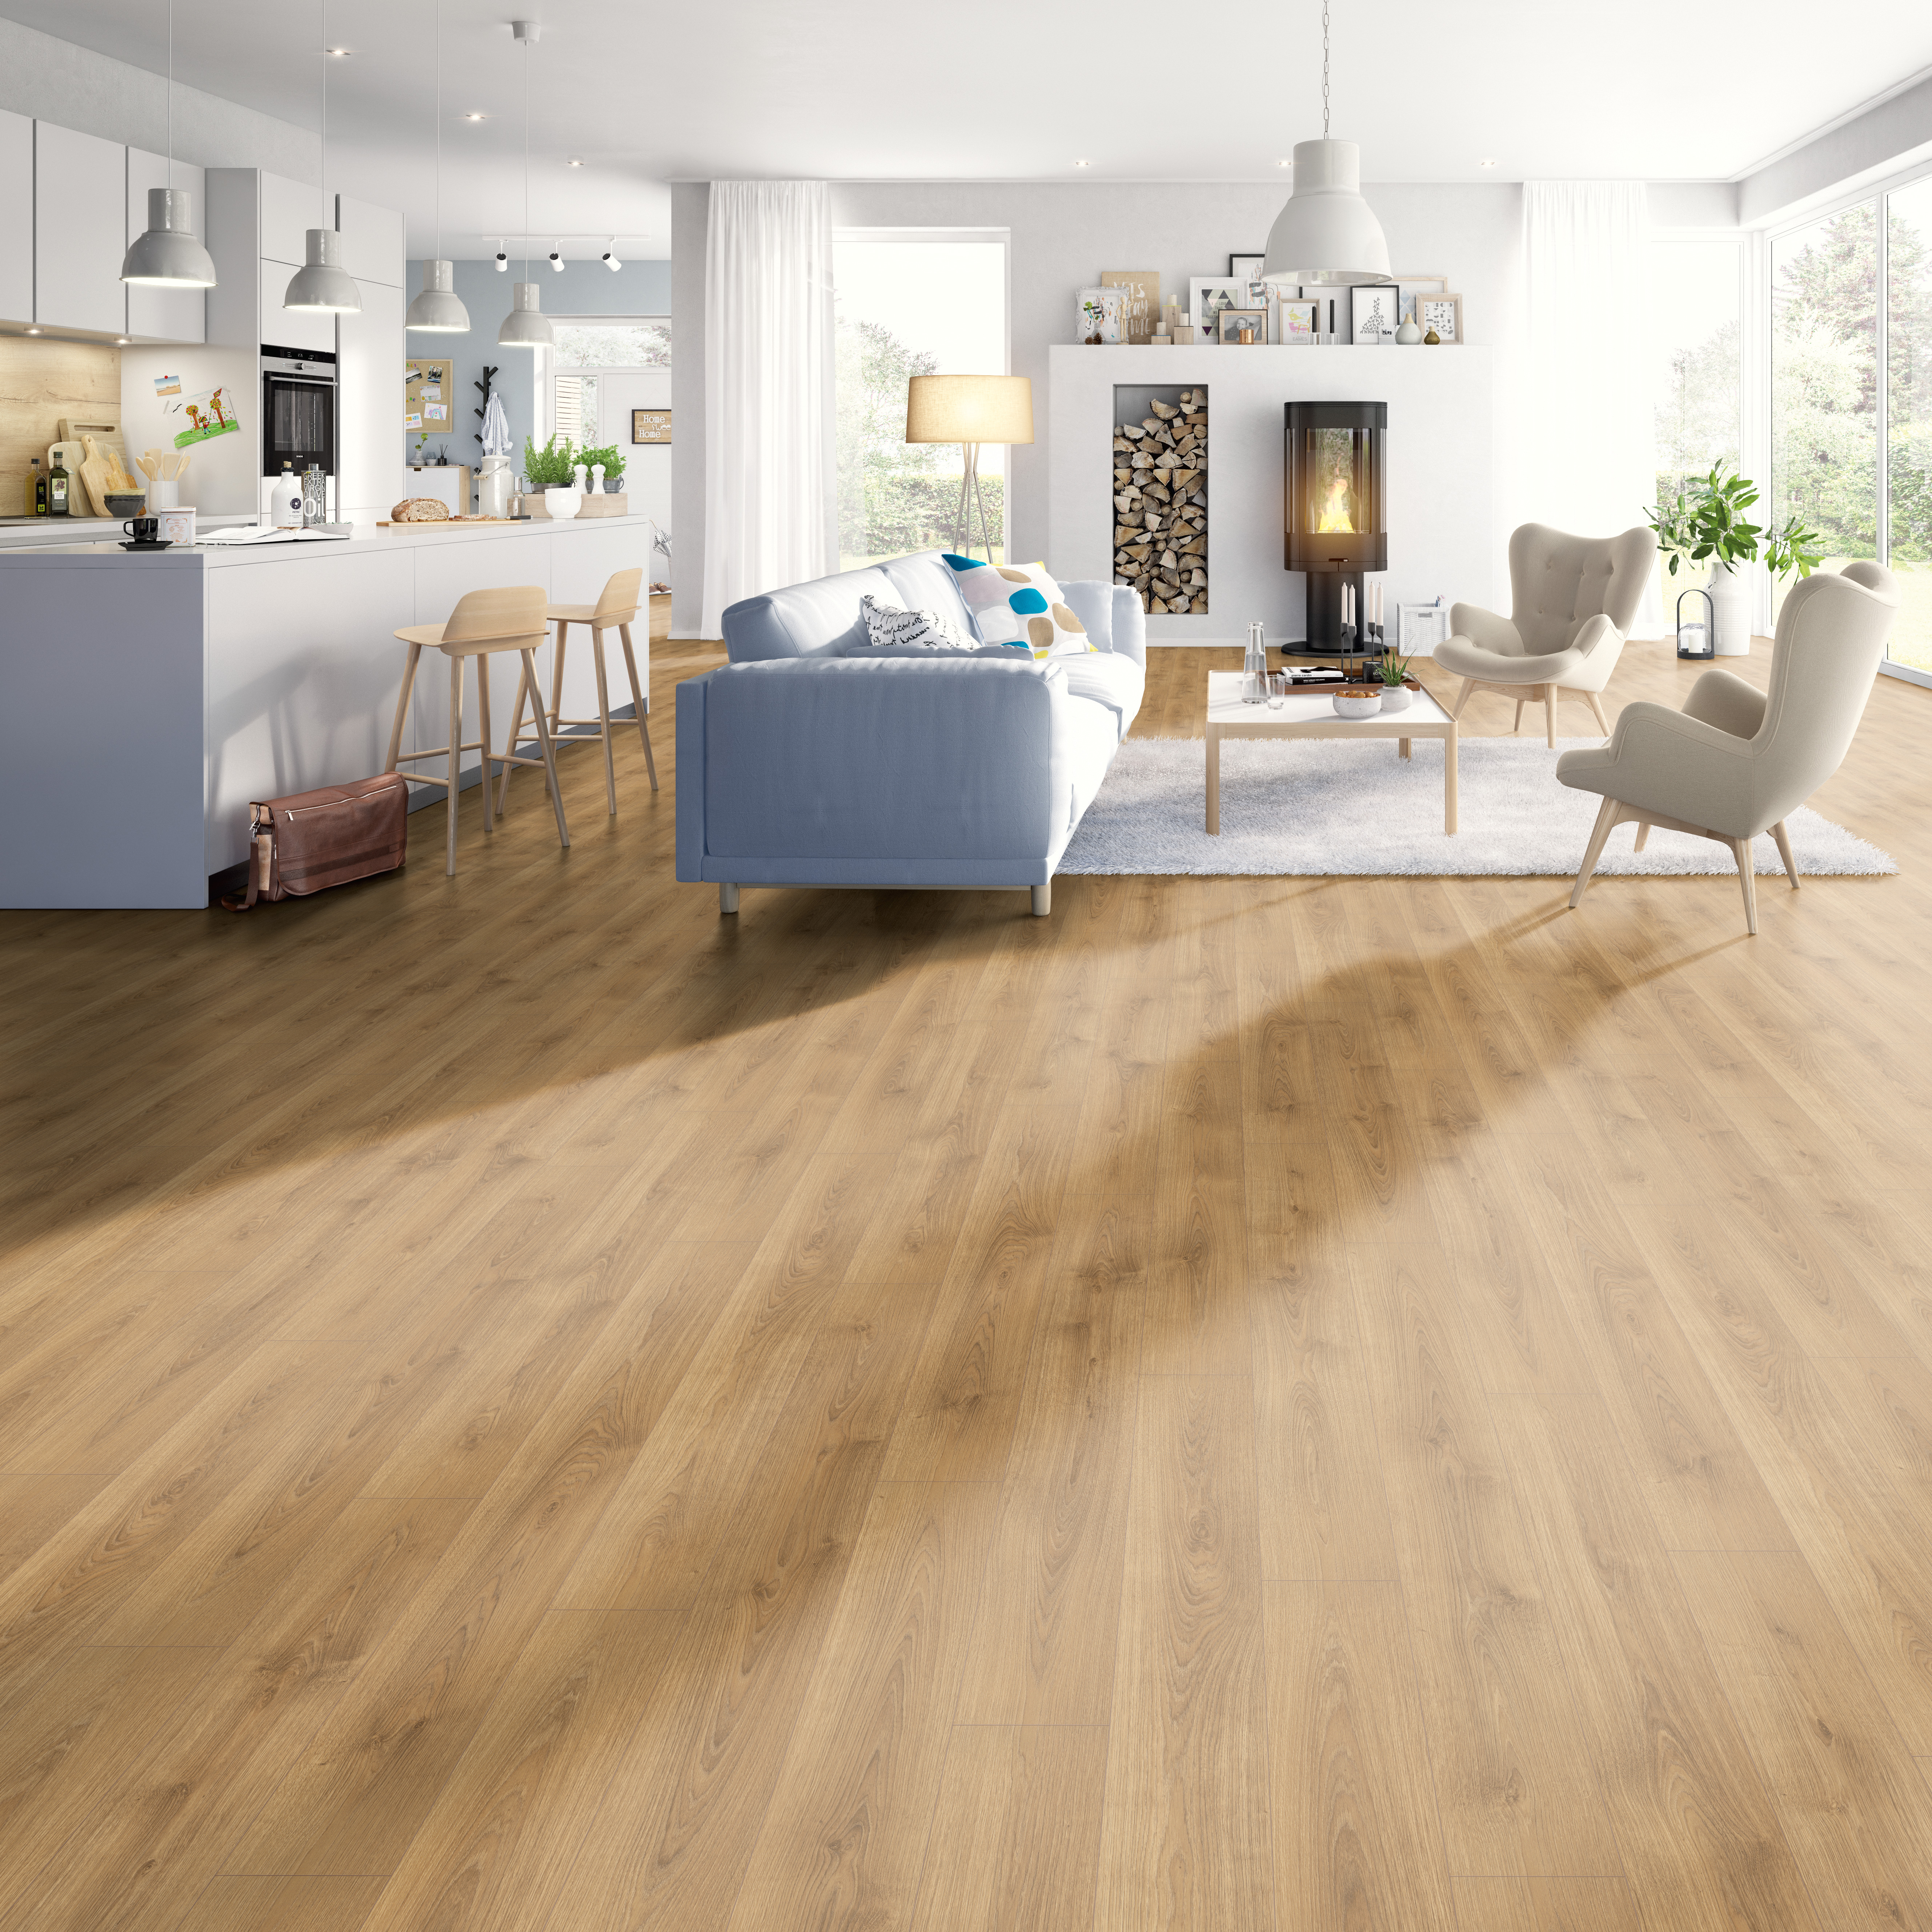 Install your flooring yourself with the EGGER HOME flooring collection!